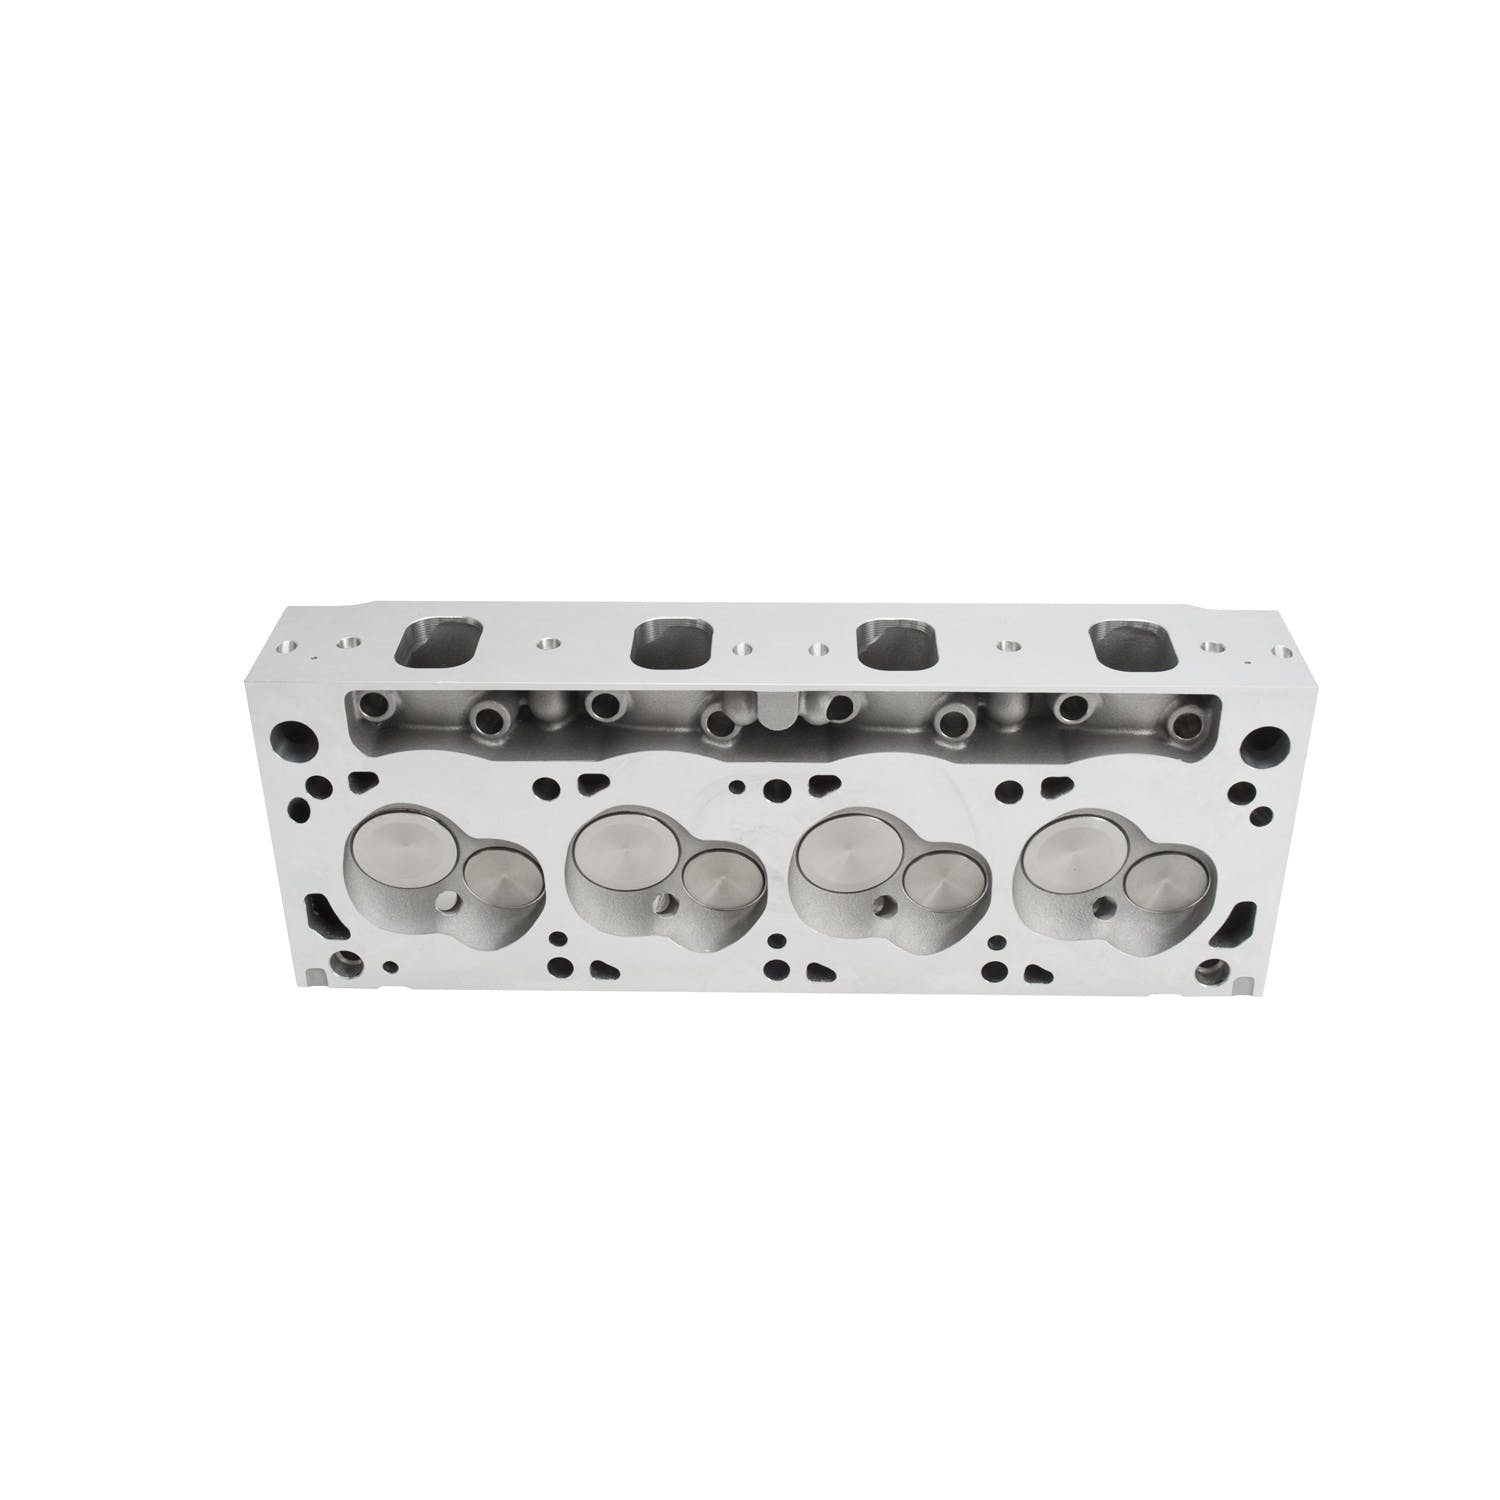 Edelbrock 61625 CYL HEAD SBF PERF RPM 351 CLEVELAND FOR HYD ROLLER CAM COMPLETE